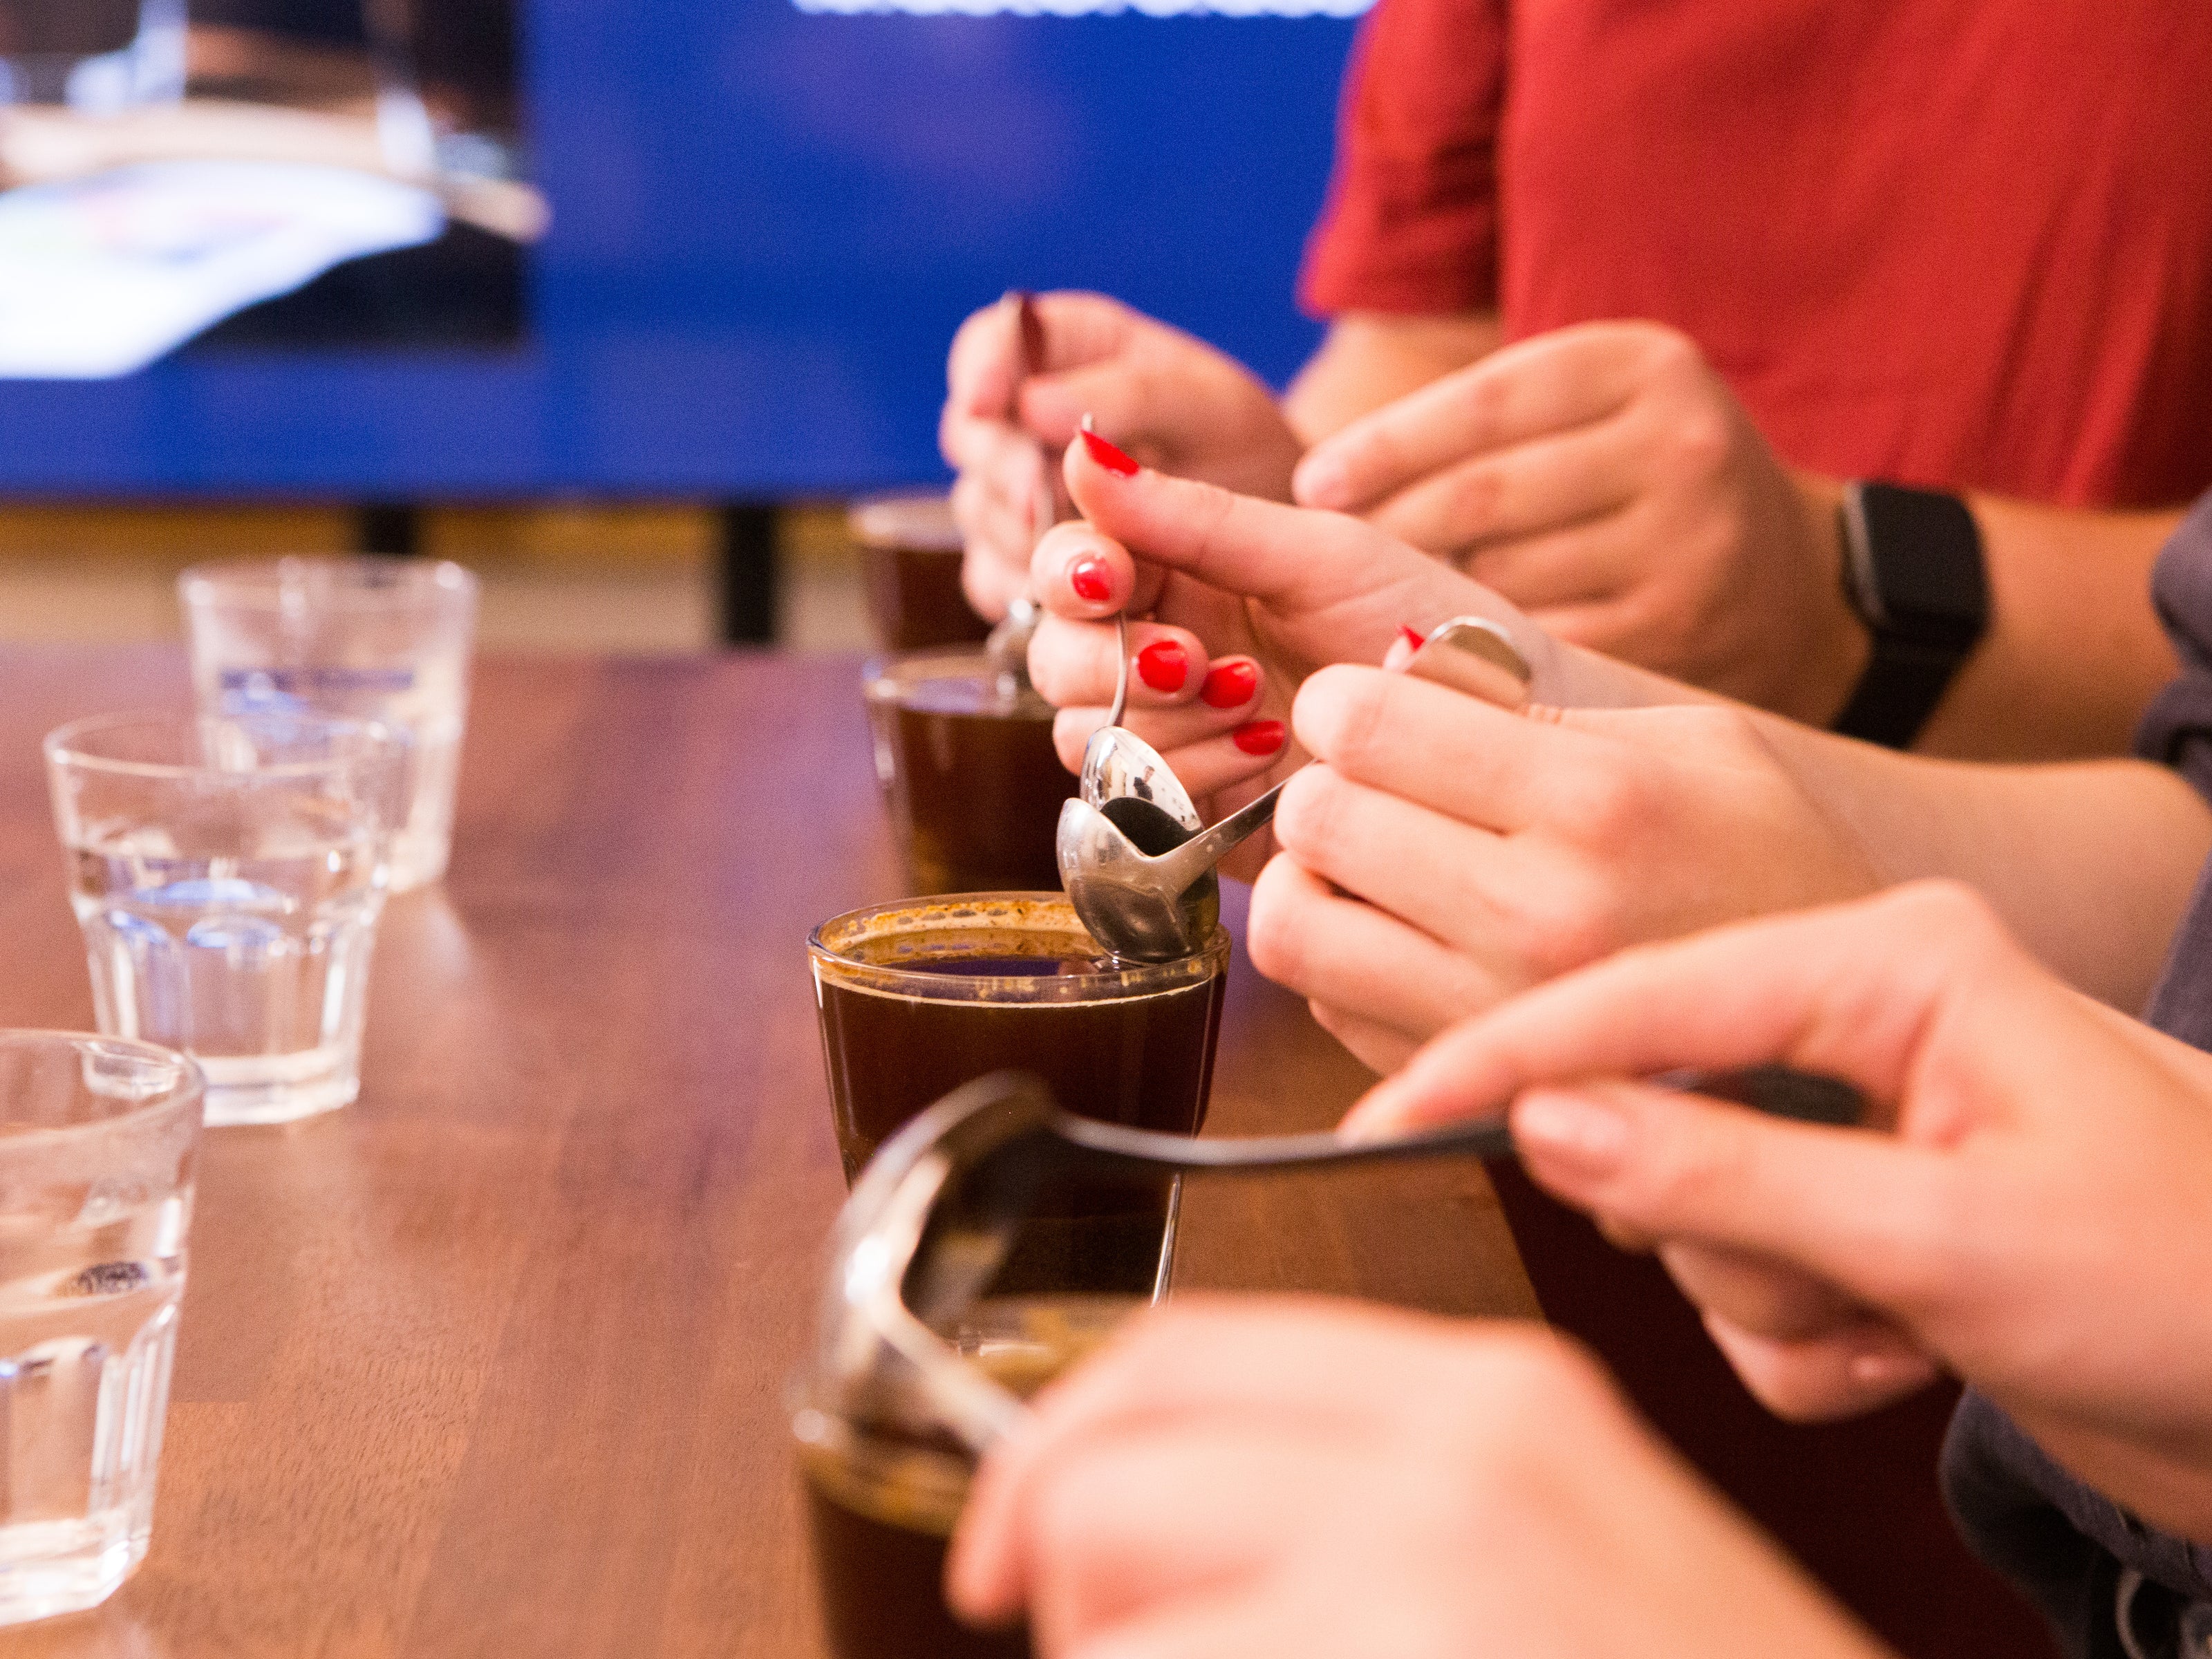 A group of people cupping coffee using cupping spoons.